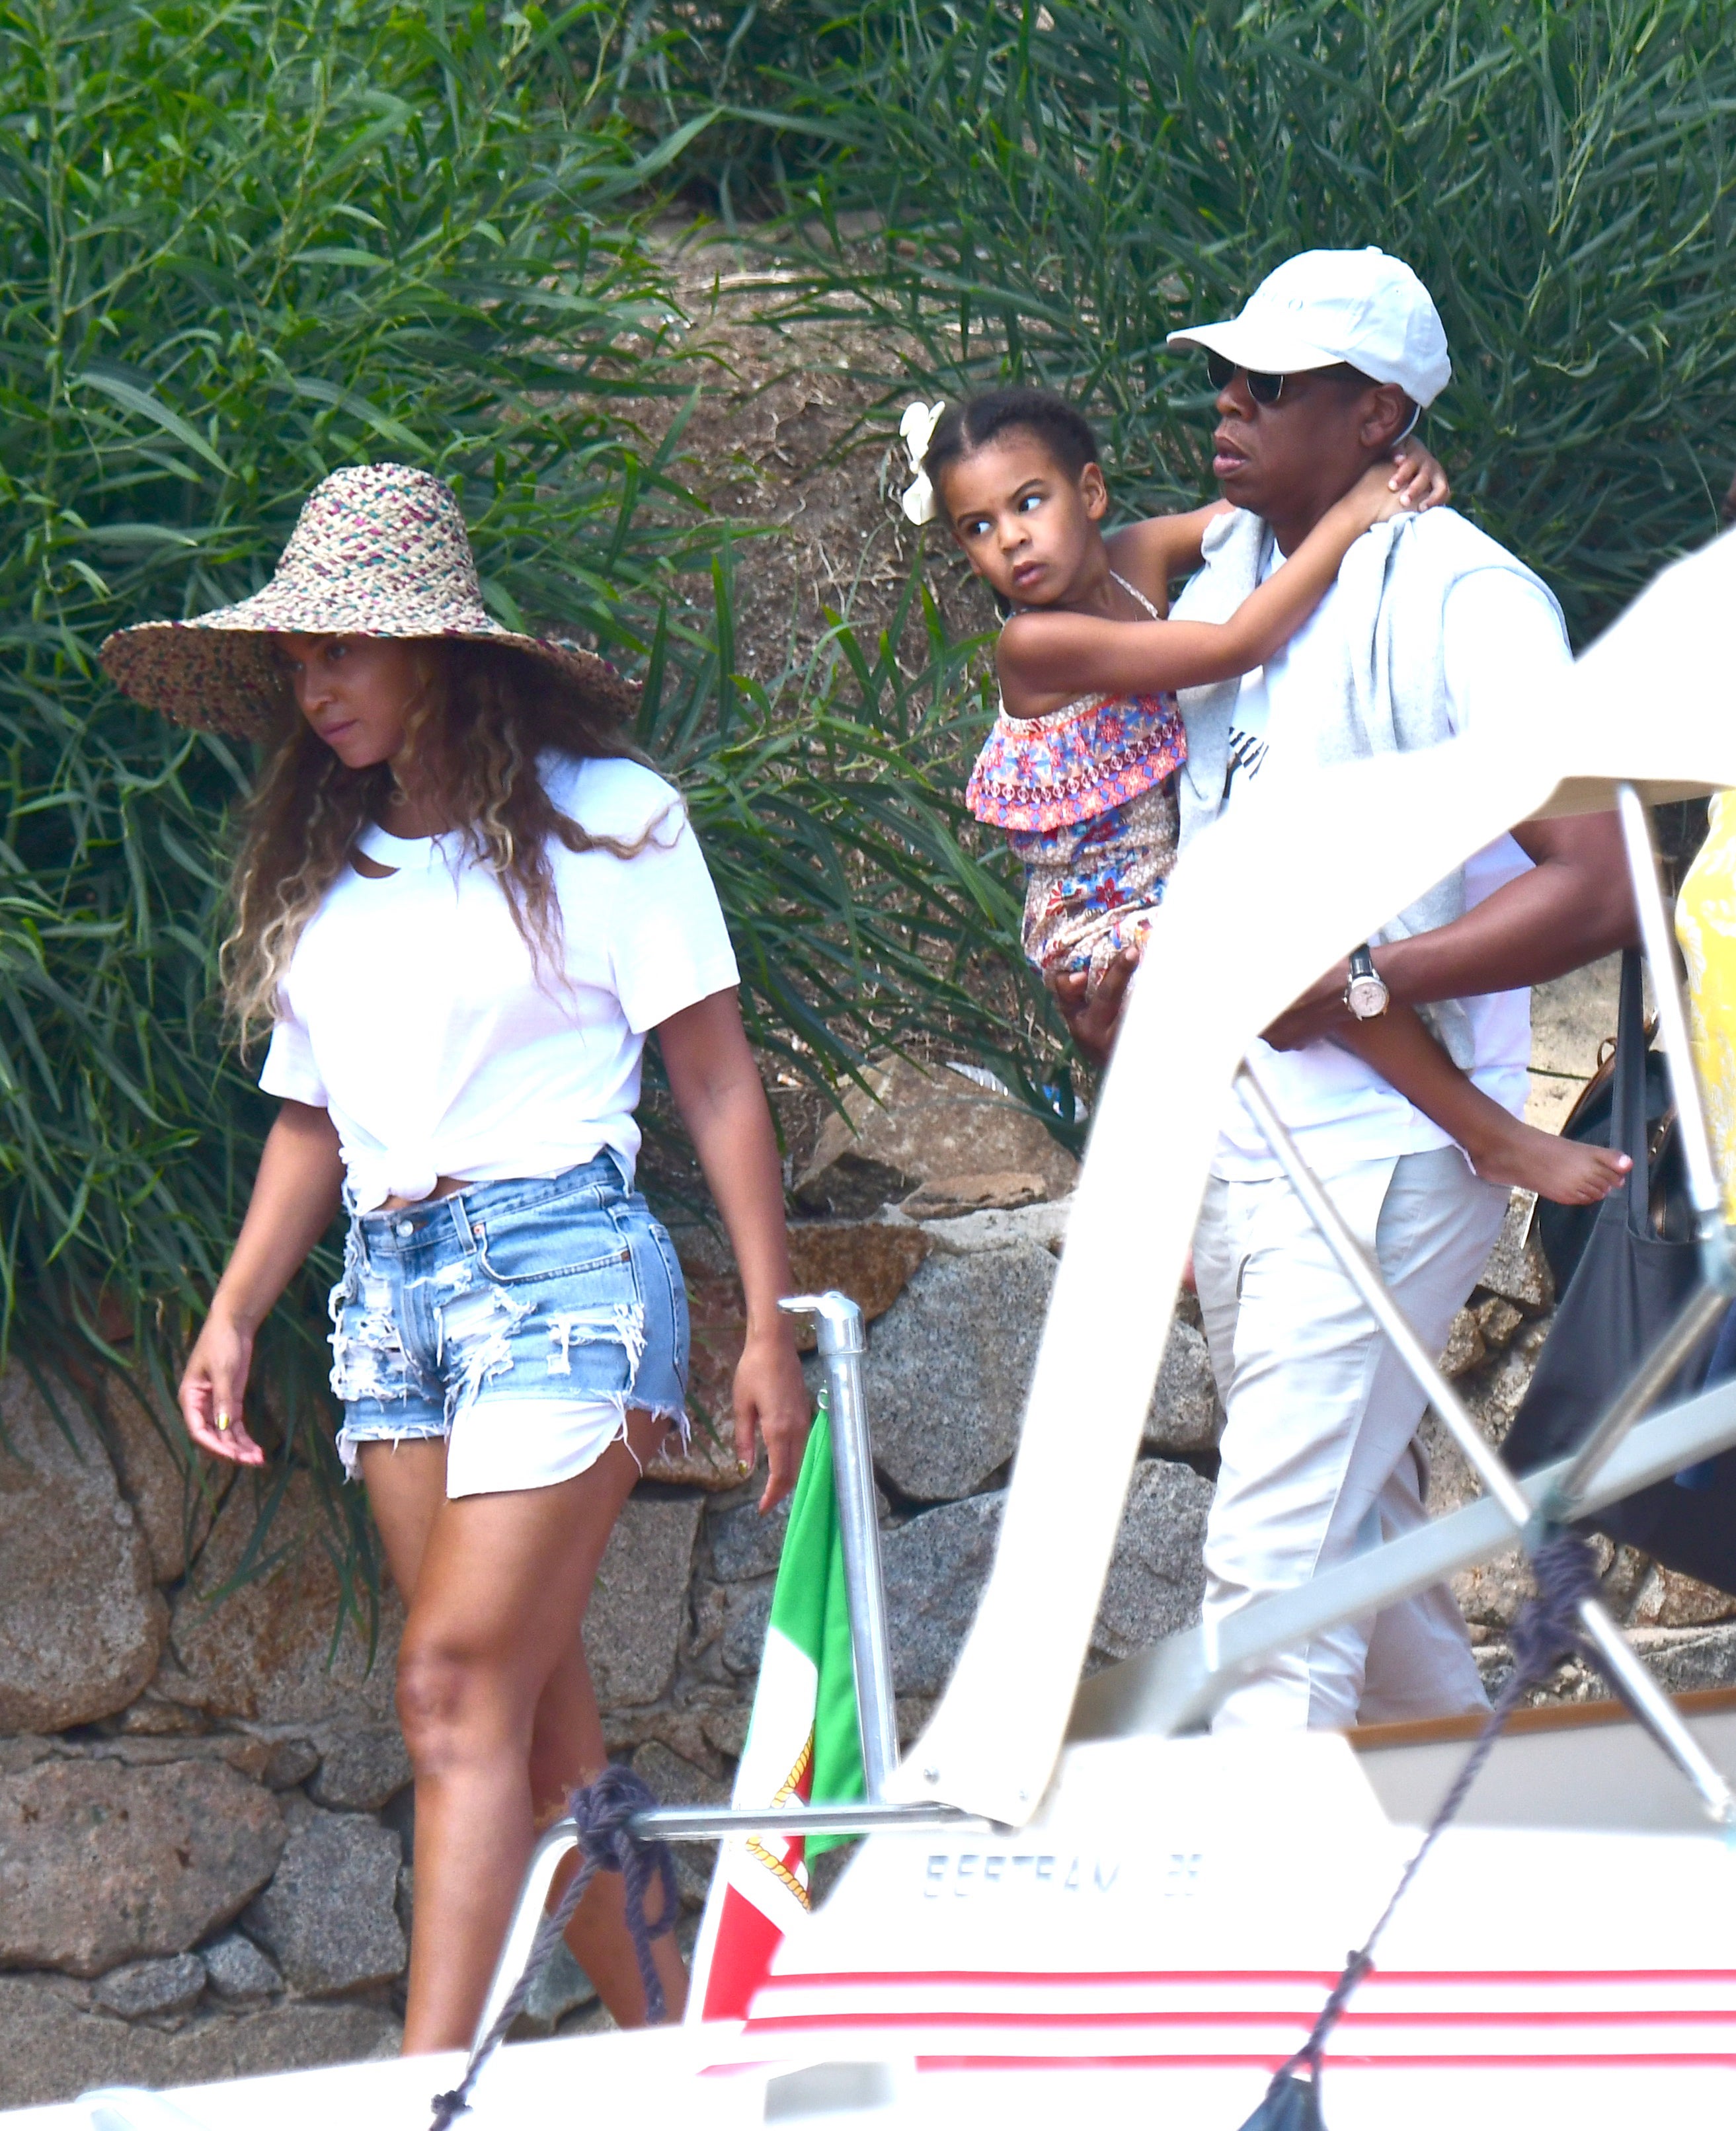 Beyonce & Jay Z, Tia Mowry, The Game and More!
